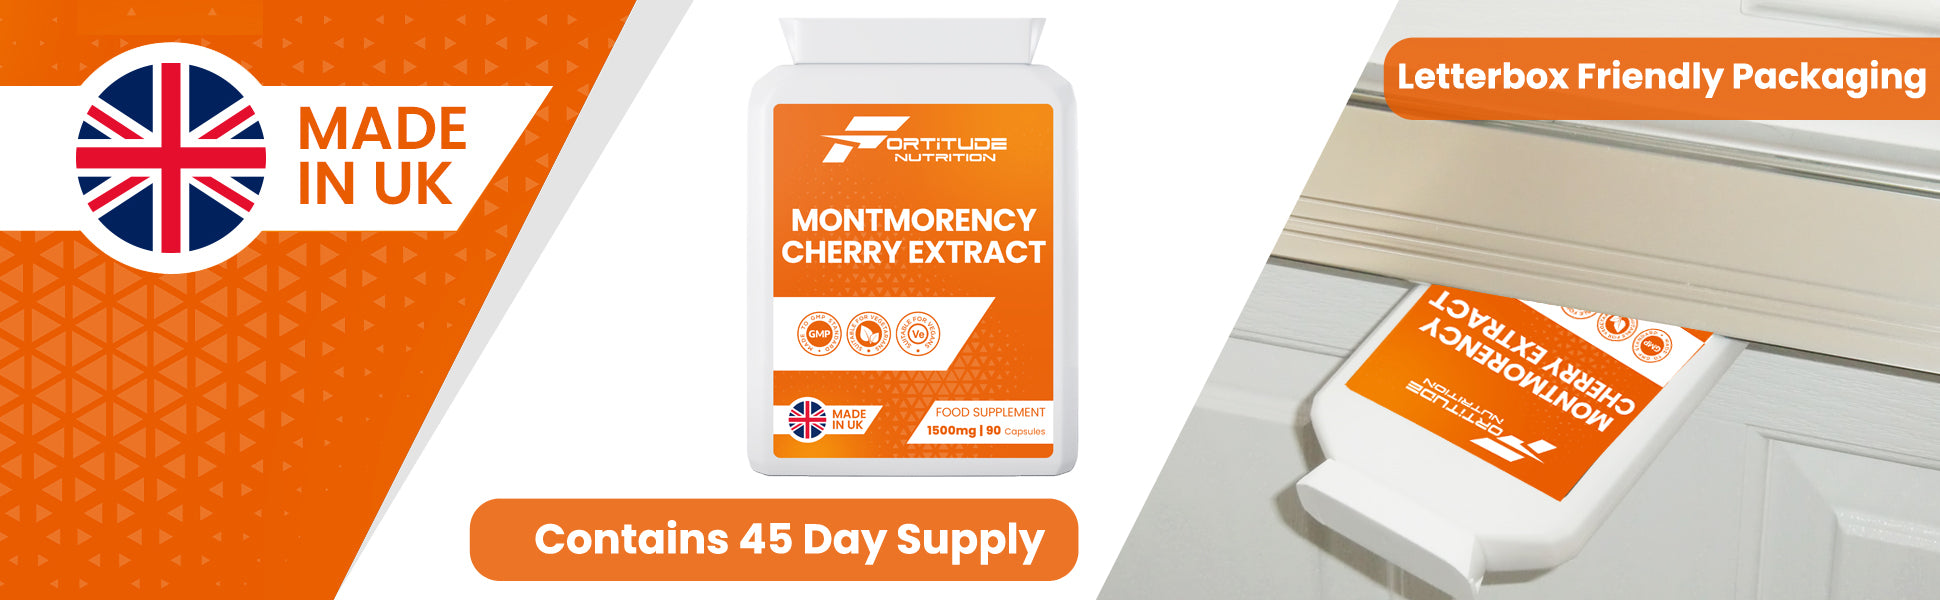 Montmorency Cherry Supplements In Letterbox Friendly Packaging